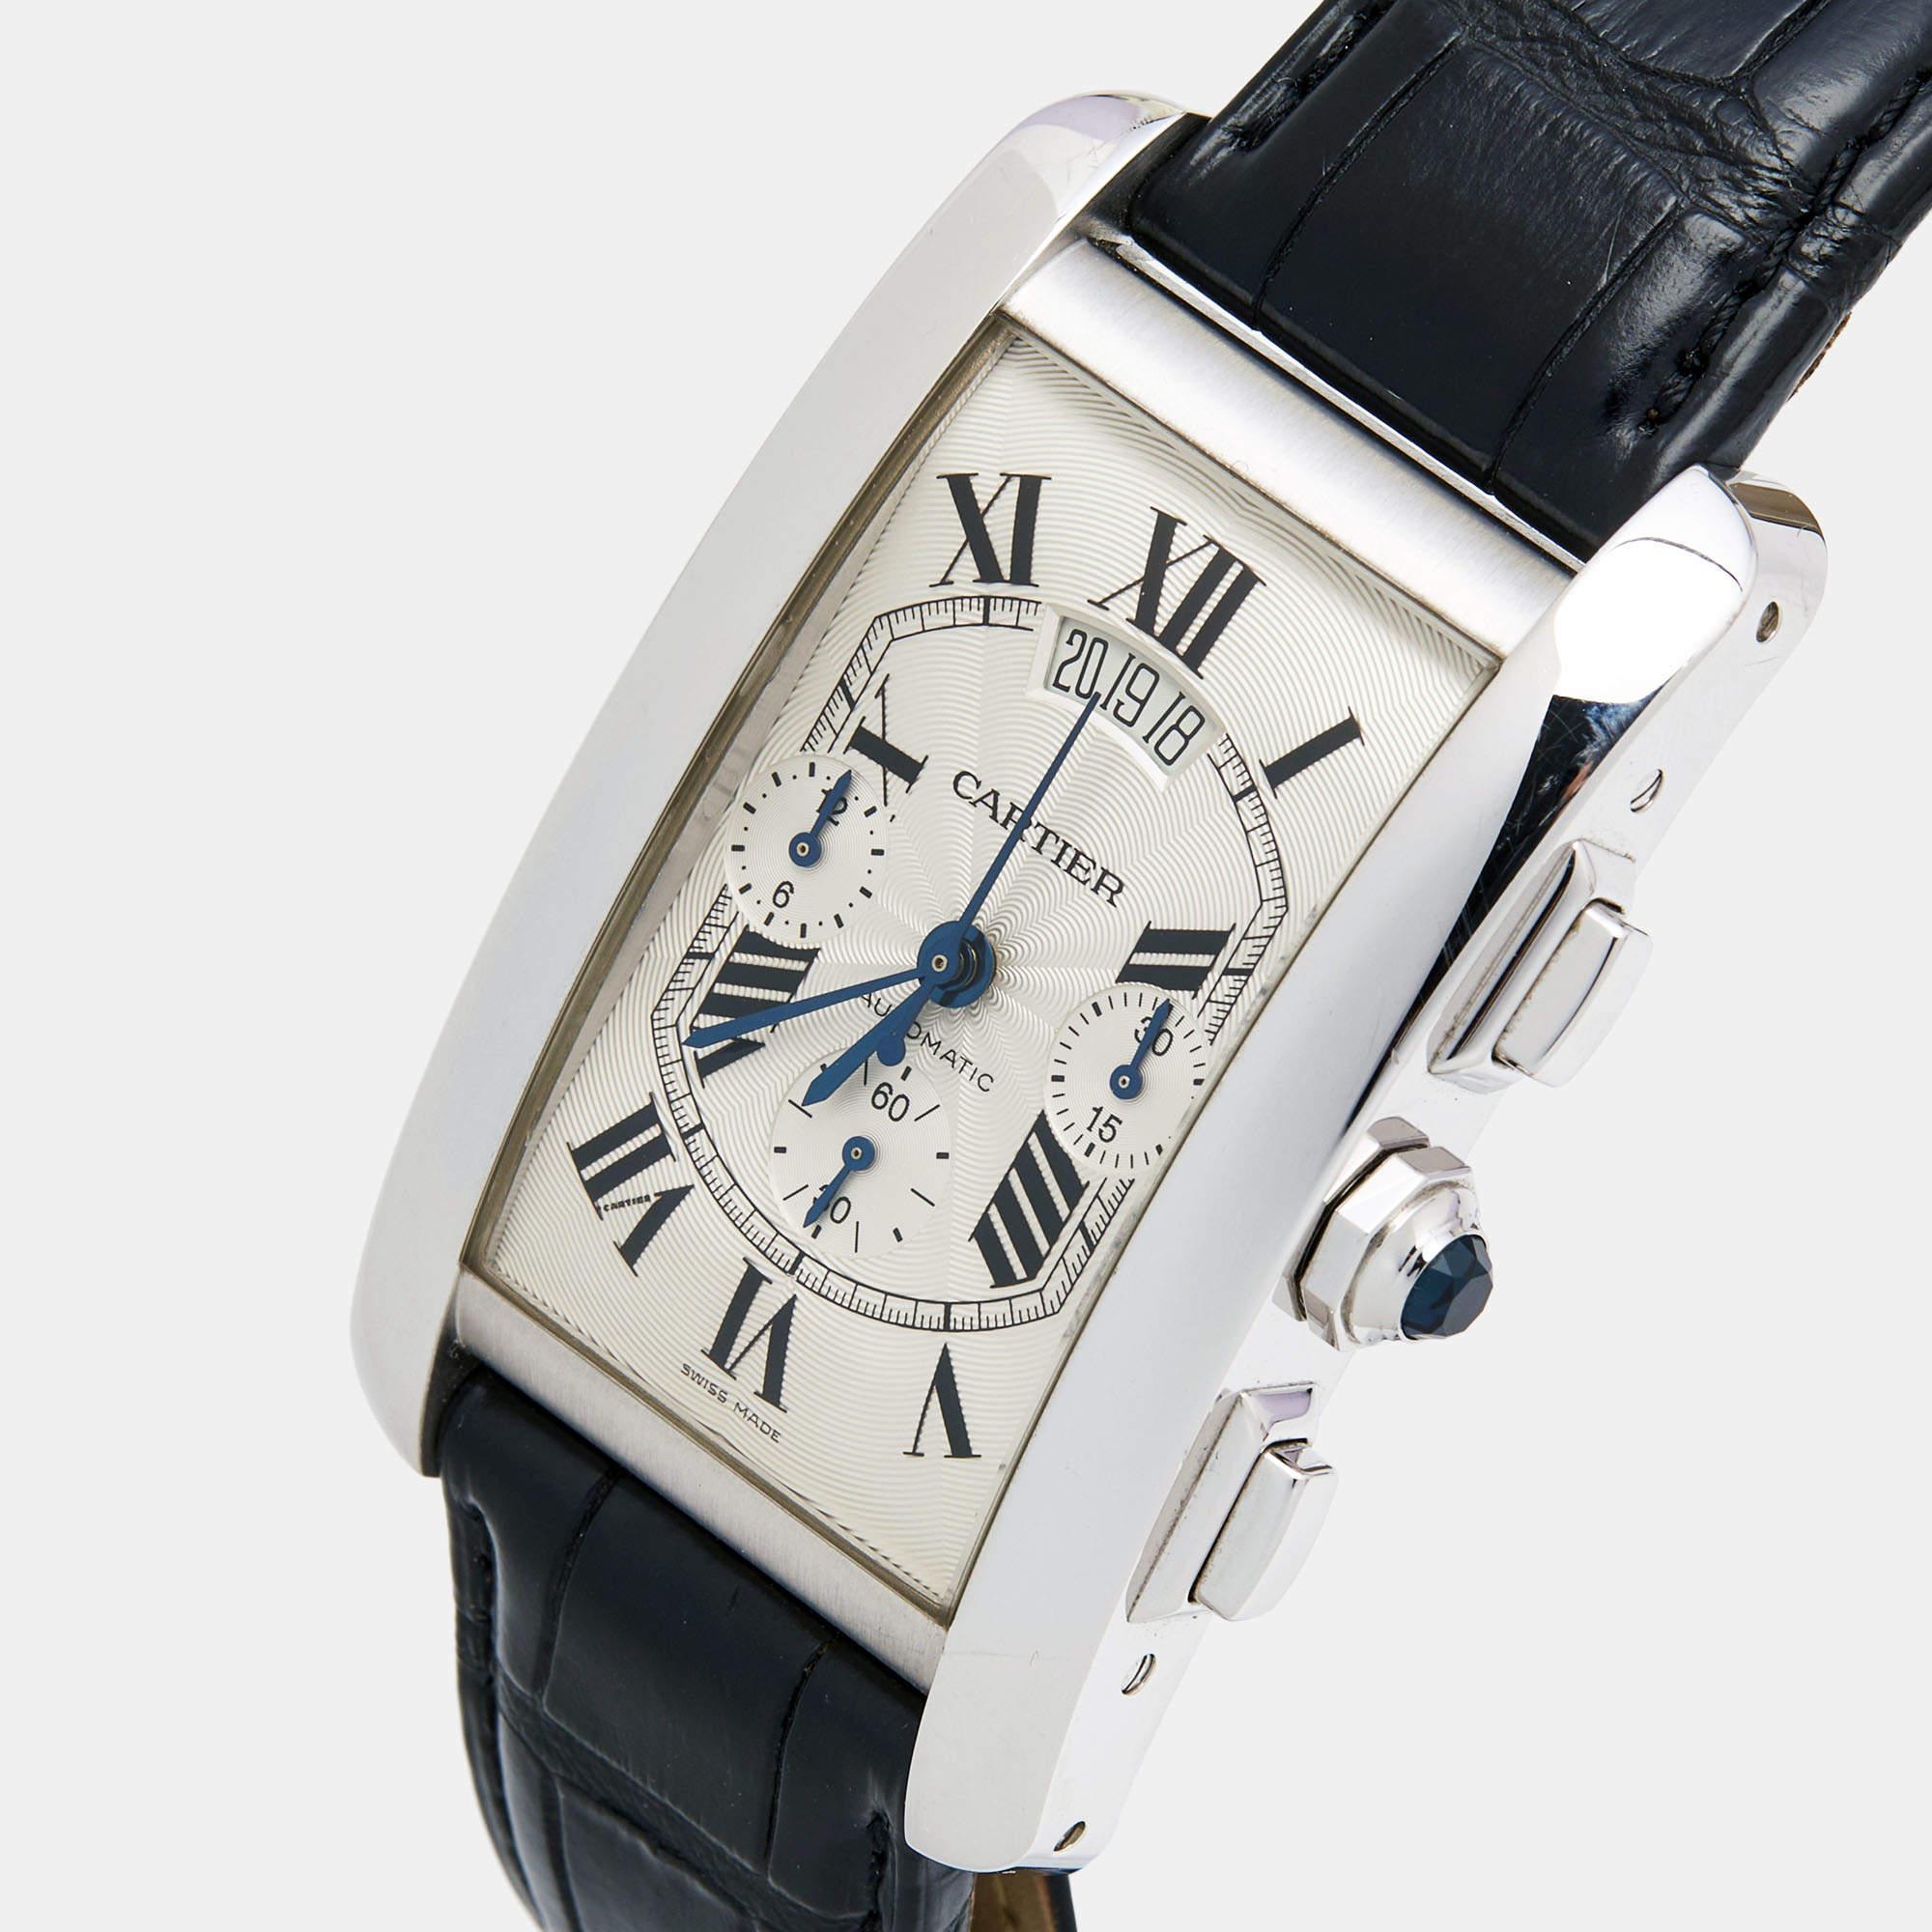 Elevate your wrist game with an authentic Cartier Tank Americaine timepiece. It has an iconic design, the best of watch craftsmanship, and the use of 18k white gold with a leather bracelet to offer the wearer luxury and elegance.

